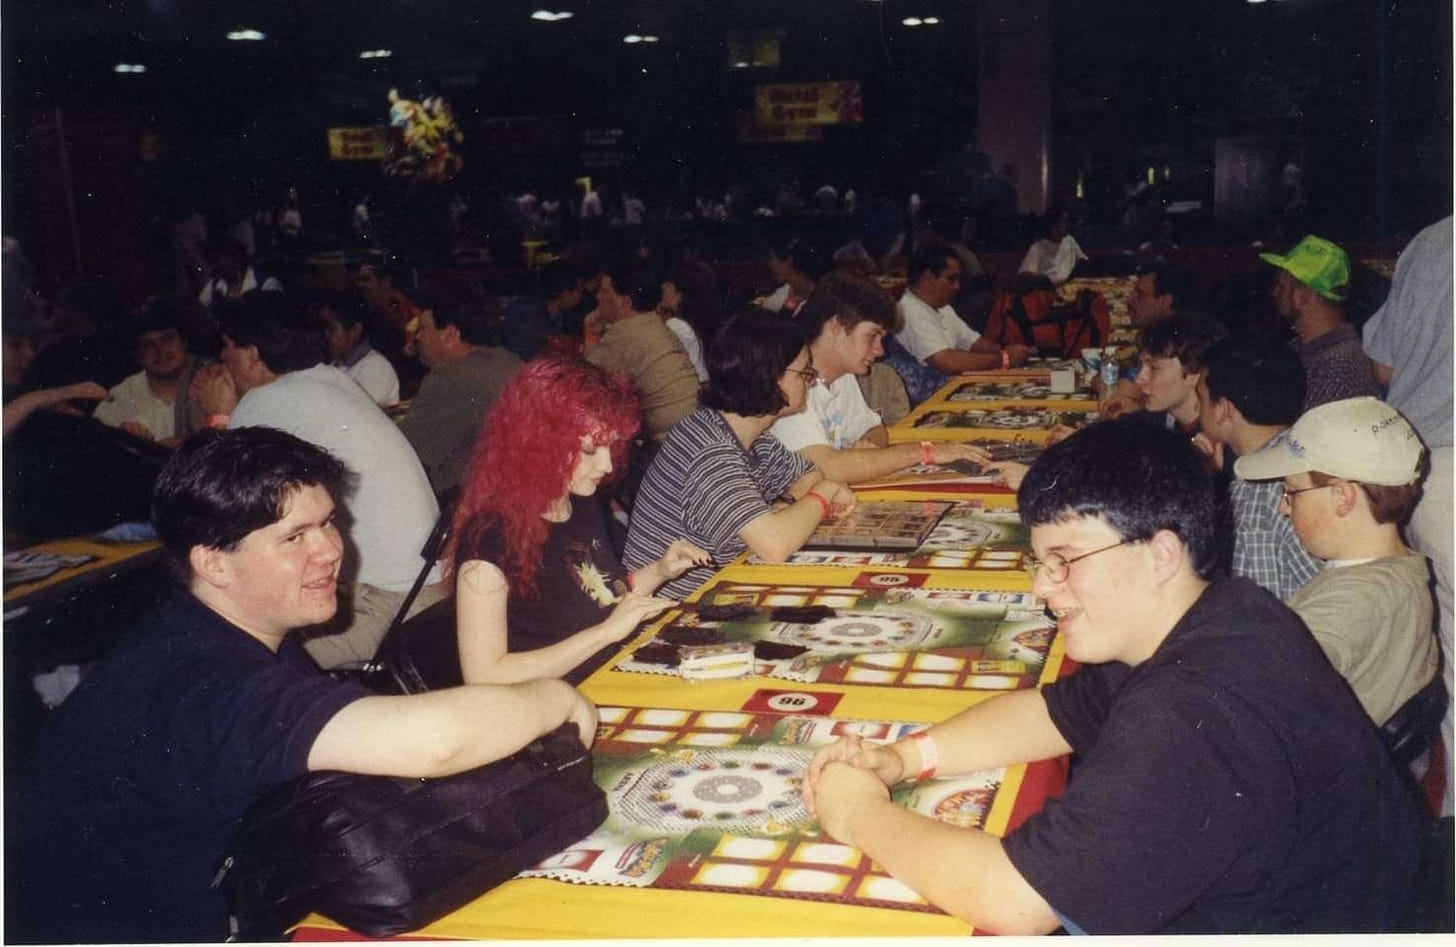 A photograph of Jim, Echidna, Purity, and IndigoMaster at the Pokémon TCG East Coast Super Trainer Showdown in 2001